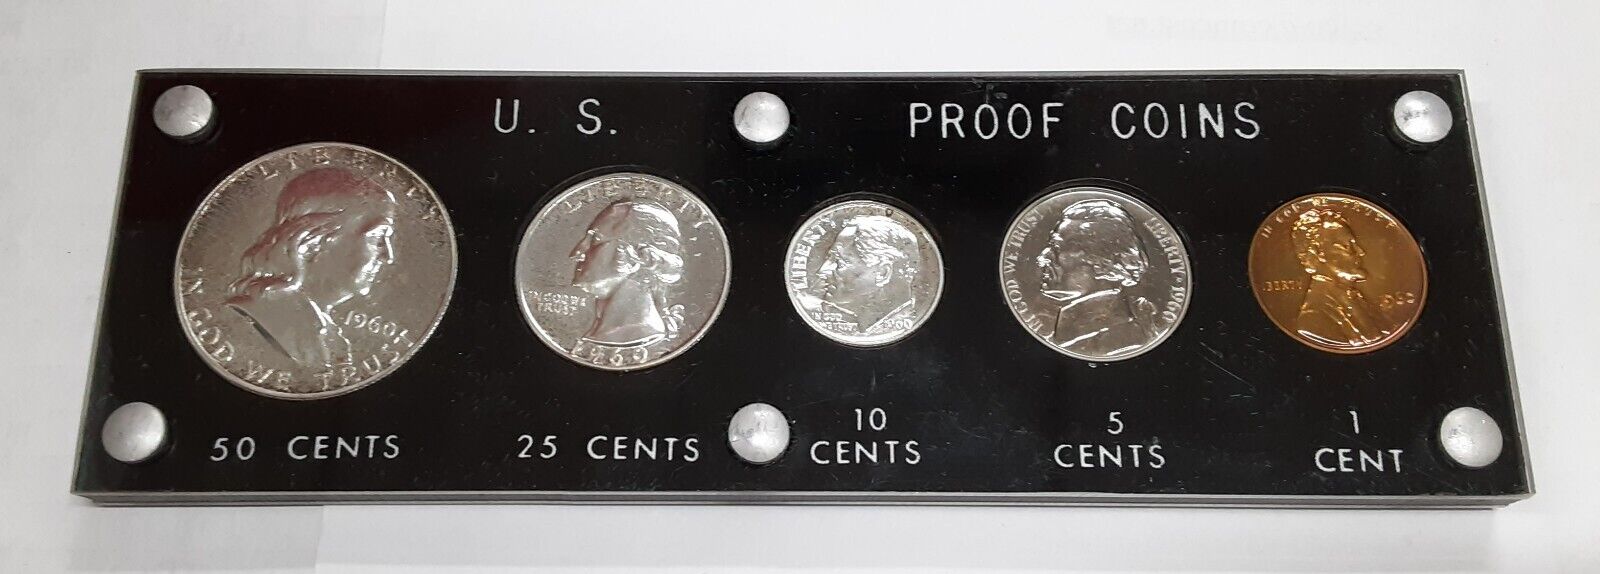 1960 Proof Year Set 5 Silver Coins w/Half, Quarter, & Dime in Black Holder (B)